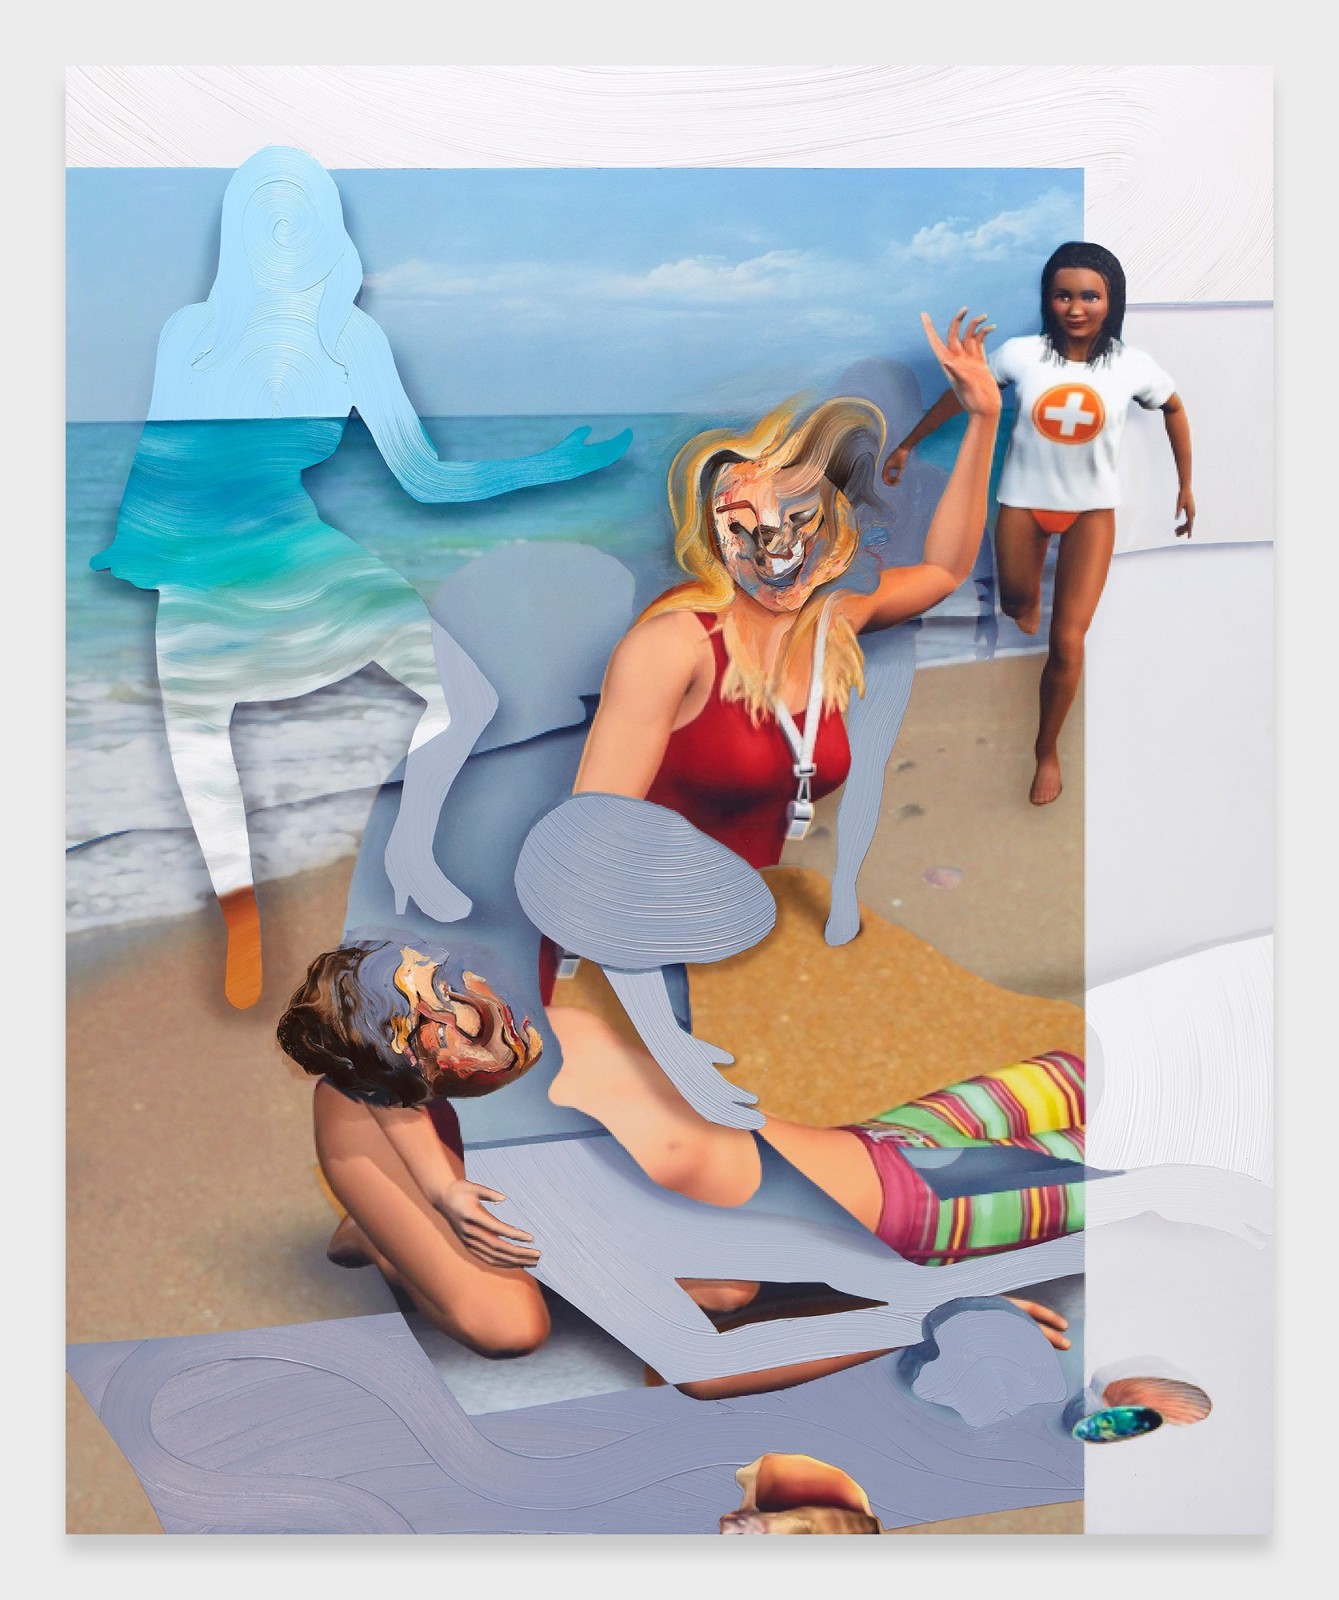 Pieter Schoolwerth, Shifted Sims #6 (Tropical Romance Island Community Event)